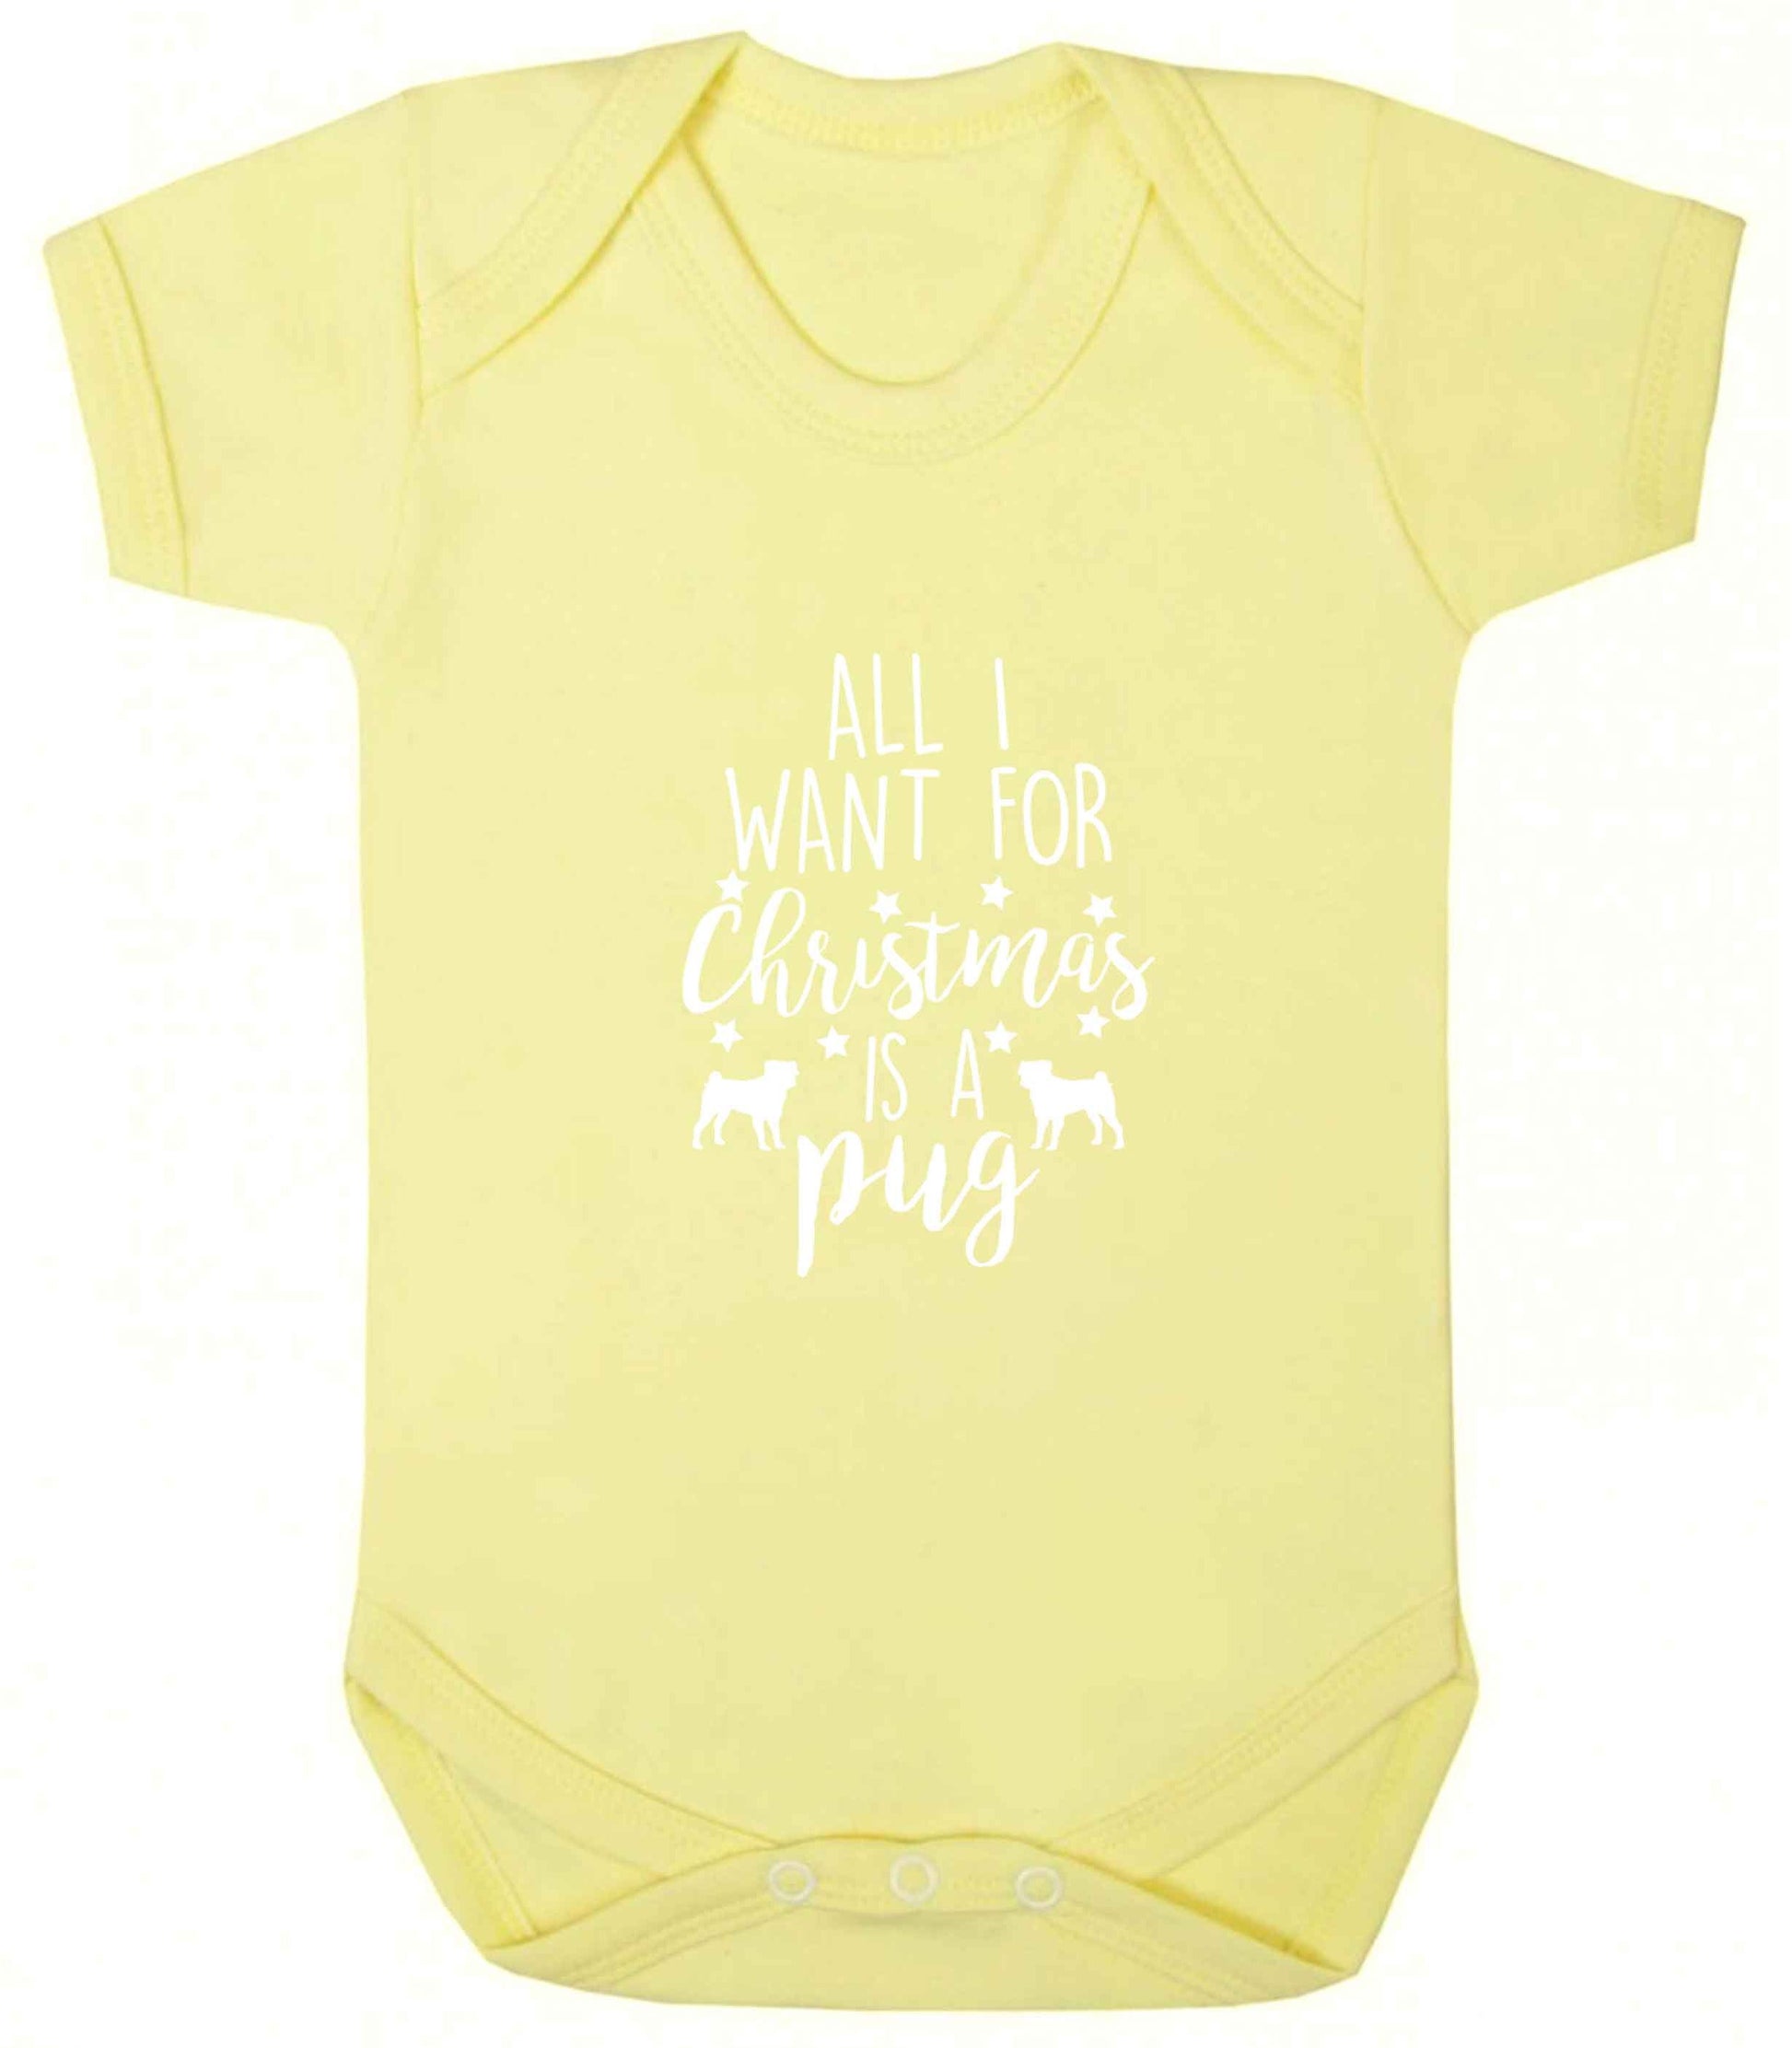 All I want for Christmas is a pug baby vest pale yellow 18-24 months